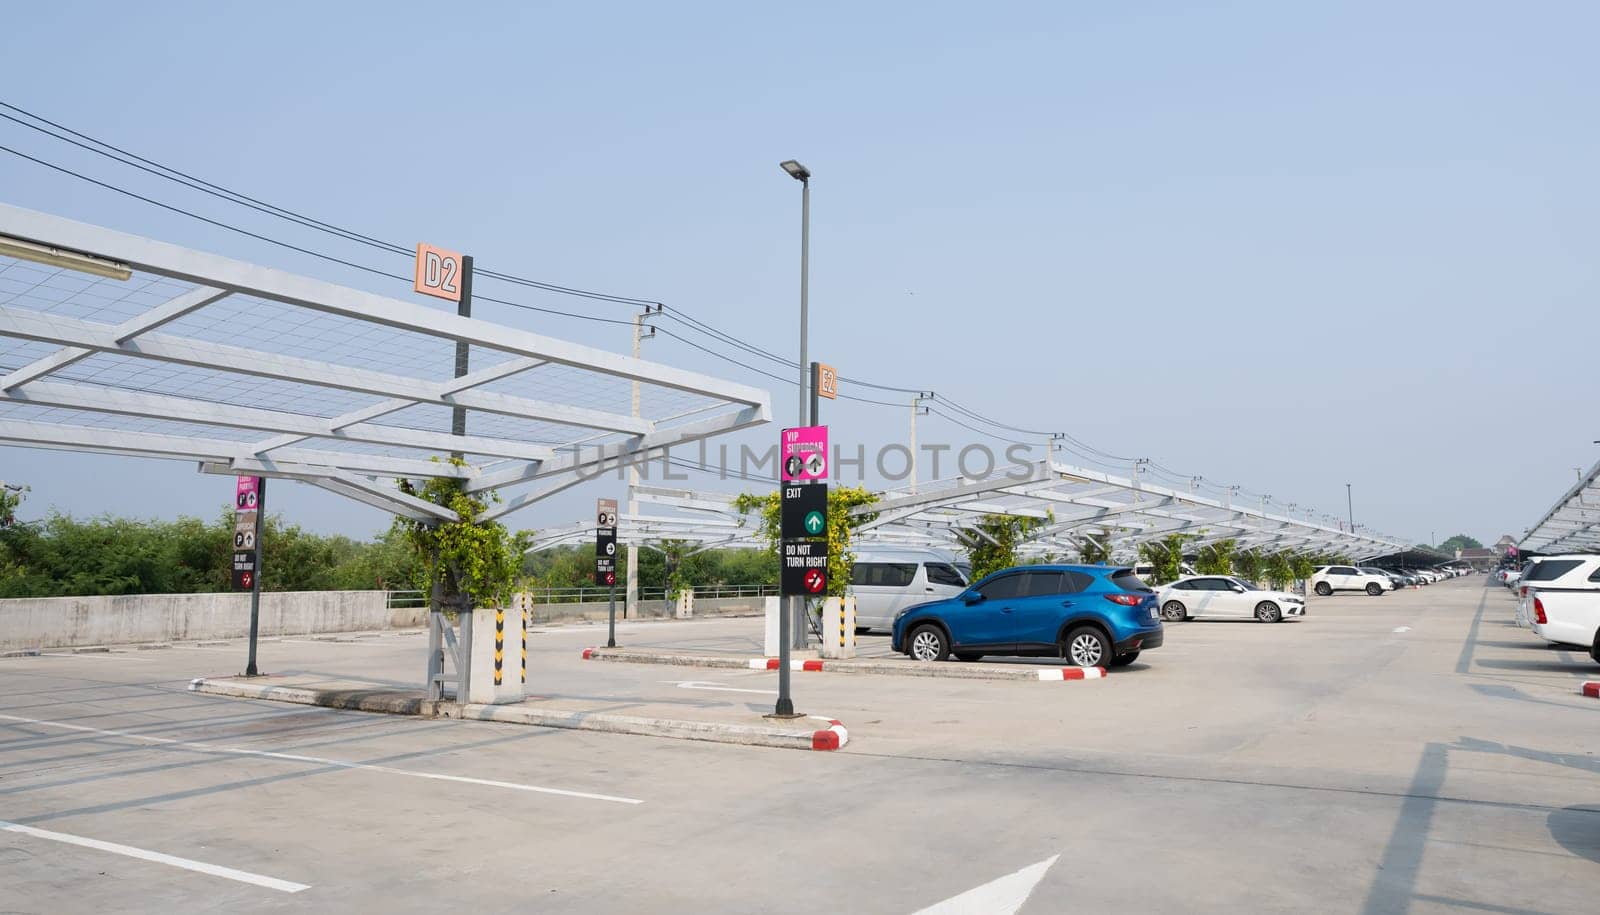 Concrete car parking lot with empty space. Private car park for customer service. Parking zone on a sunny day. Outdoor parking lot of shopping mall. Outdoor car parking lot with green climbing plant.  by Fahroni